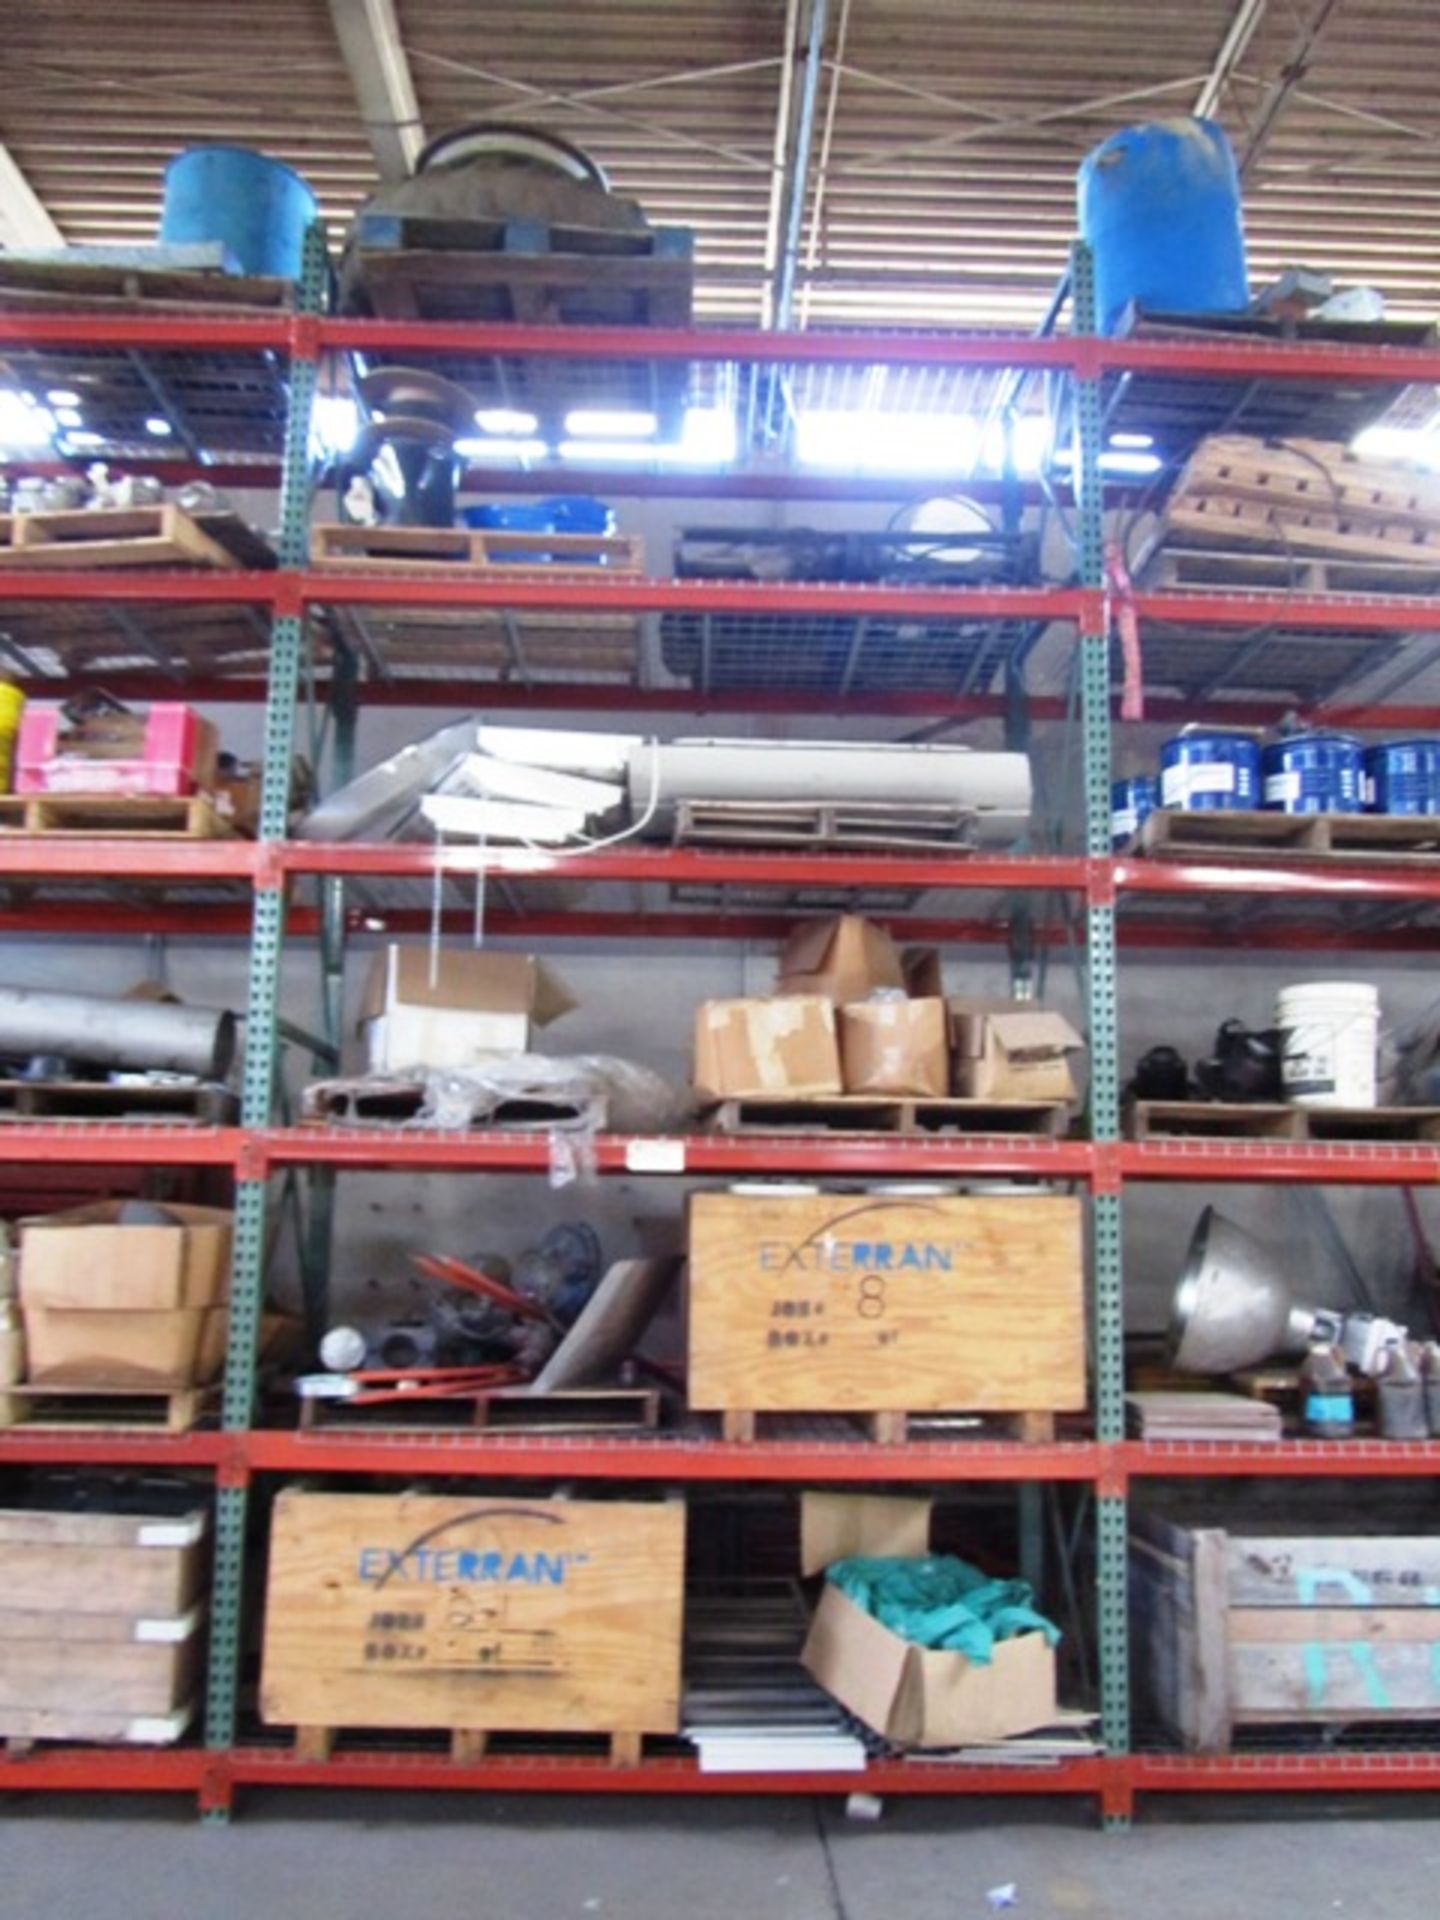 Contents of 6 Vertical Sections Pallet Racking consisting of Tractor Tire with Rim, Lights, Crates